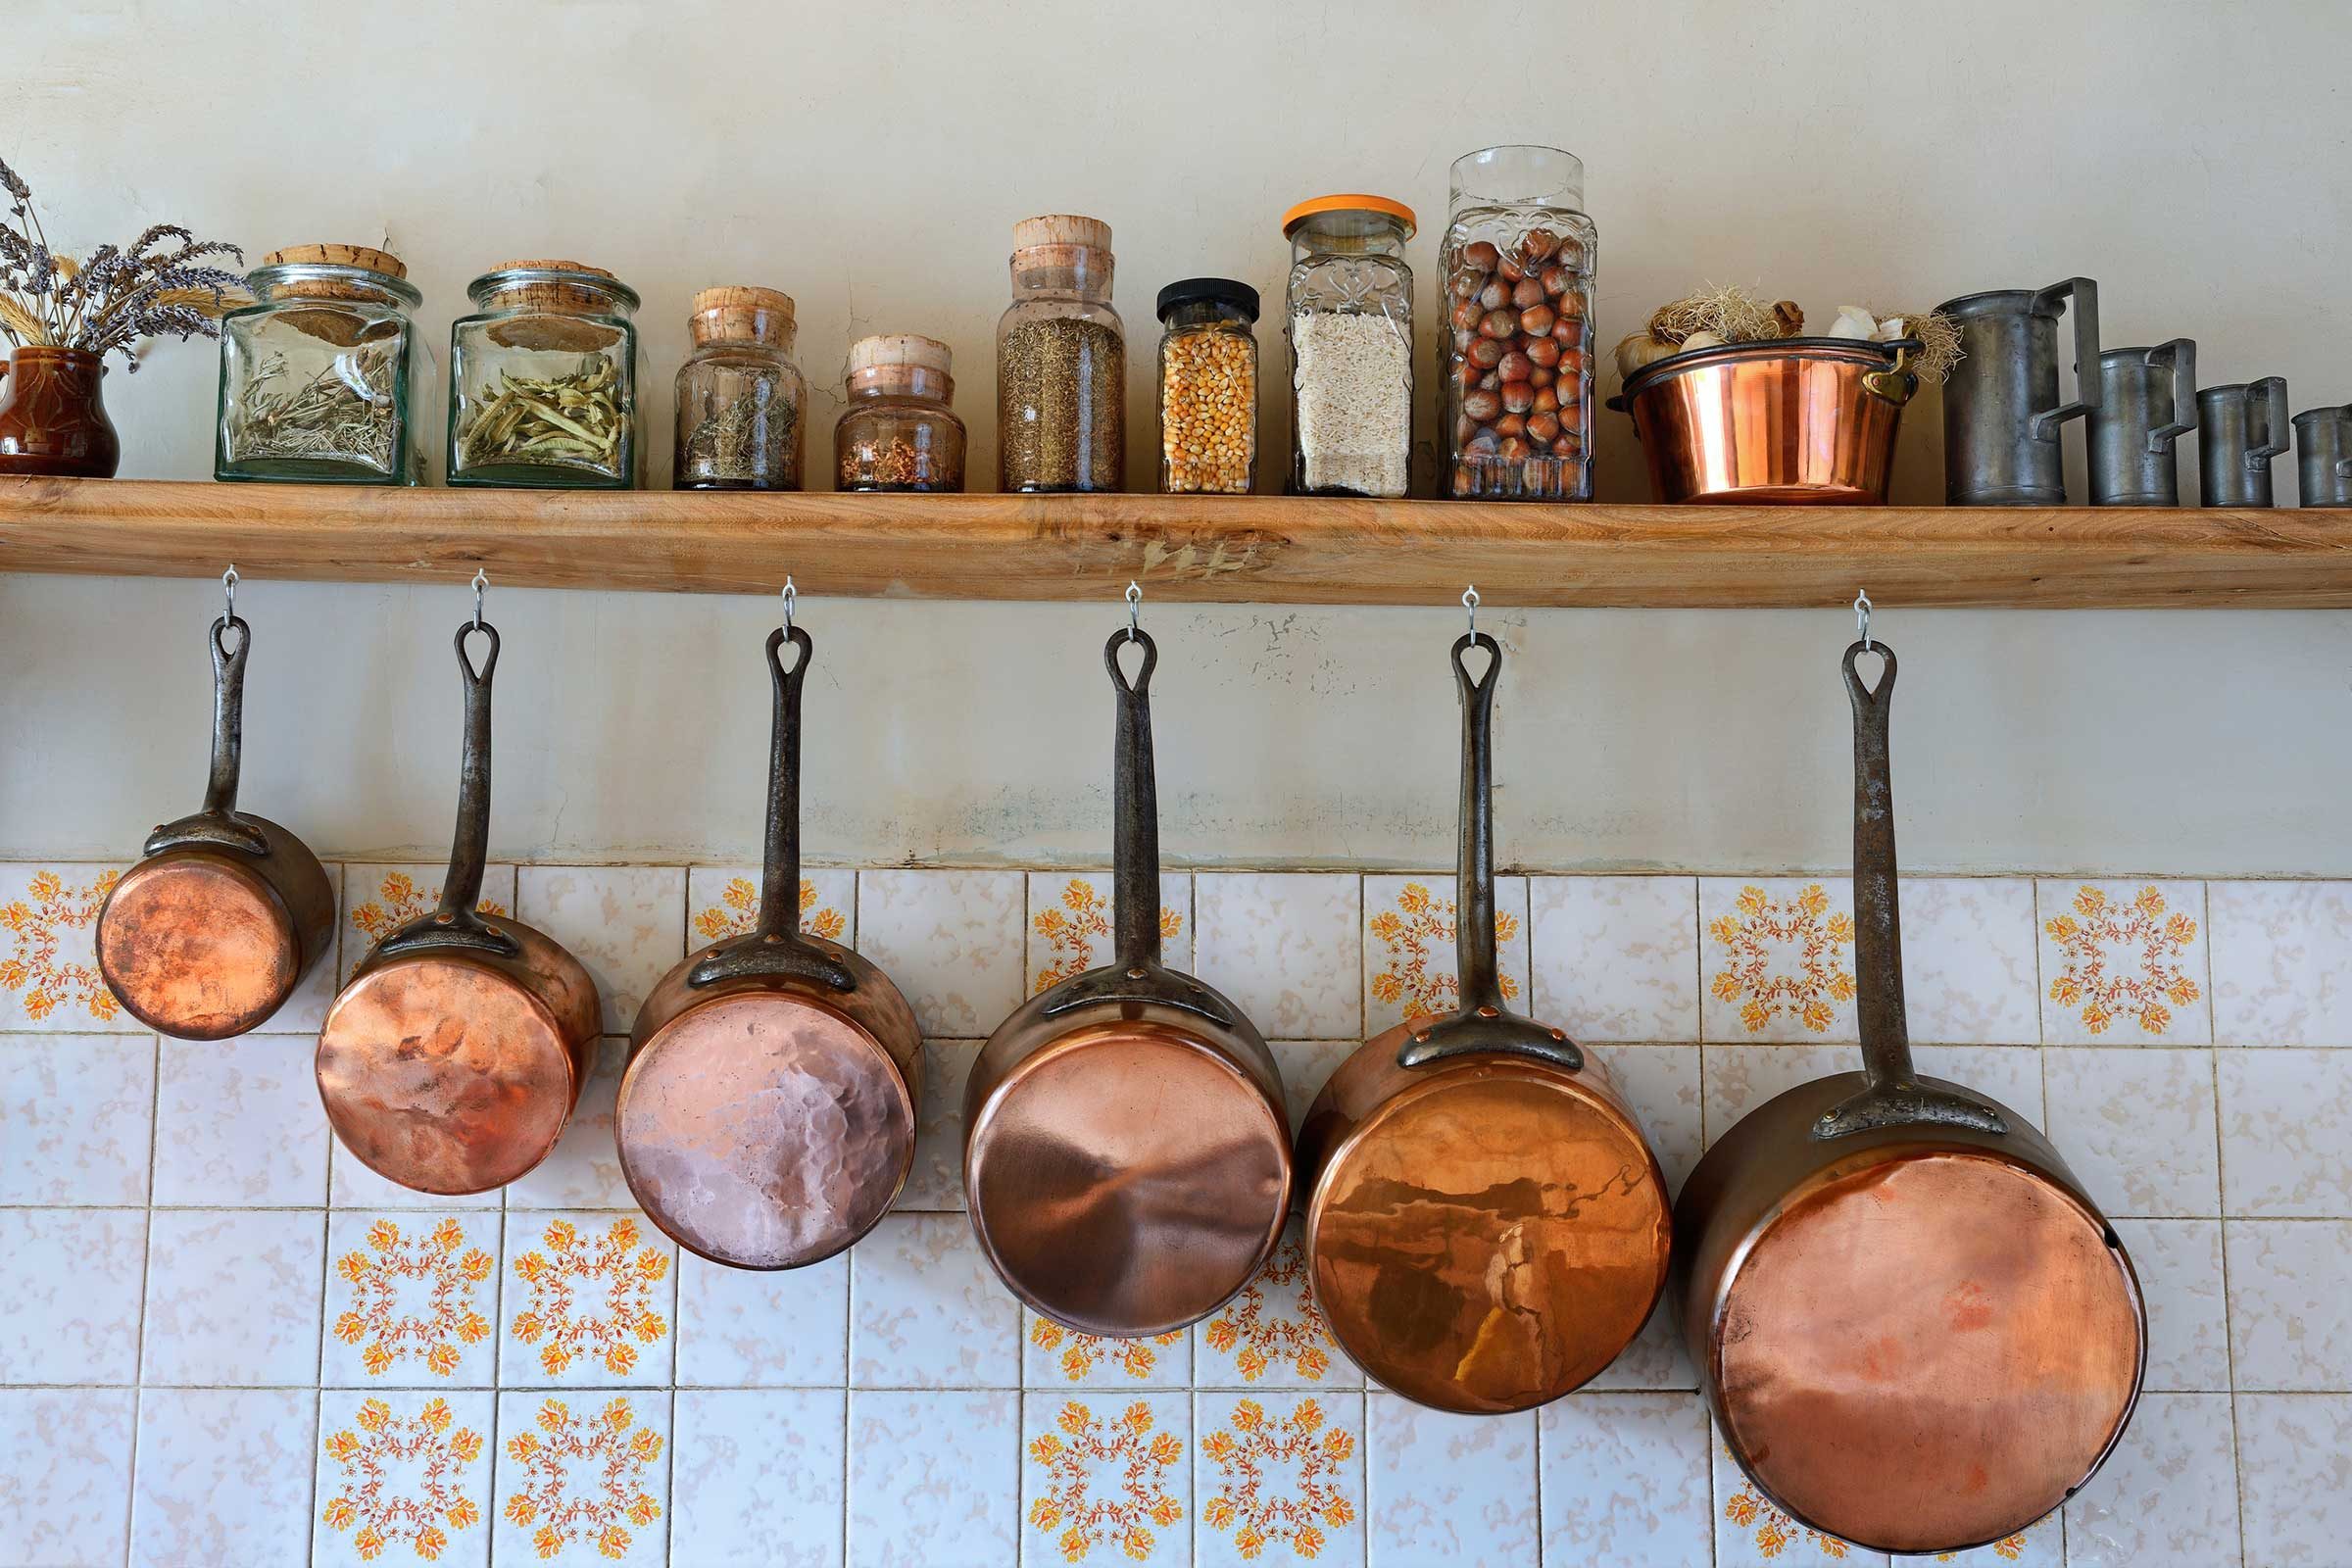 How to Organize Pots and Pans | Reader's Digest